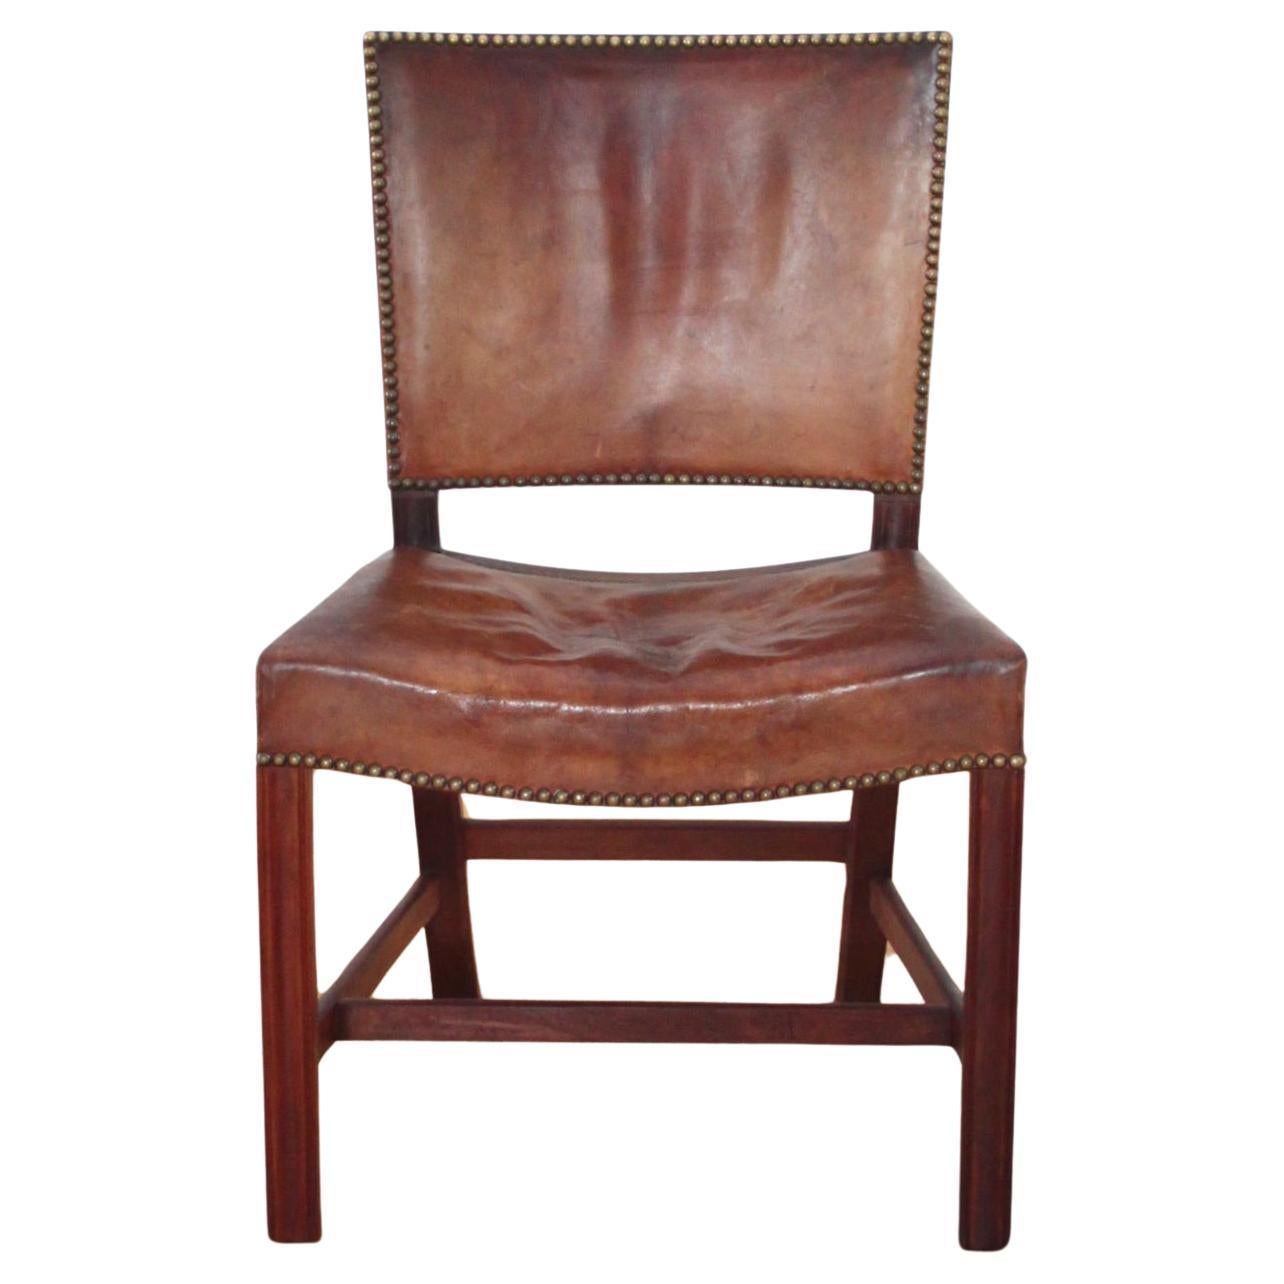 Kaare Klint Red Chair, Rud Rasmussen, Original Niger Leather and Mahogany frame For Sale